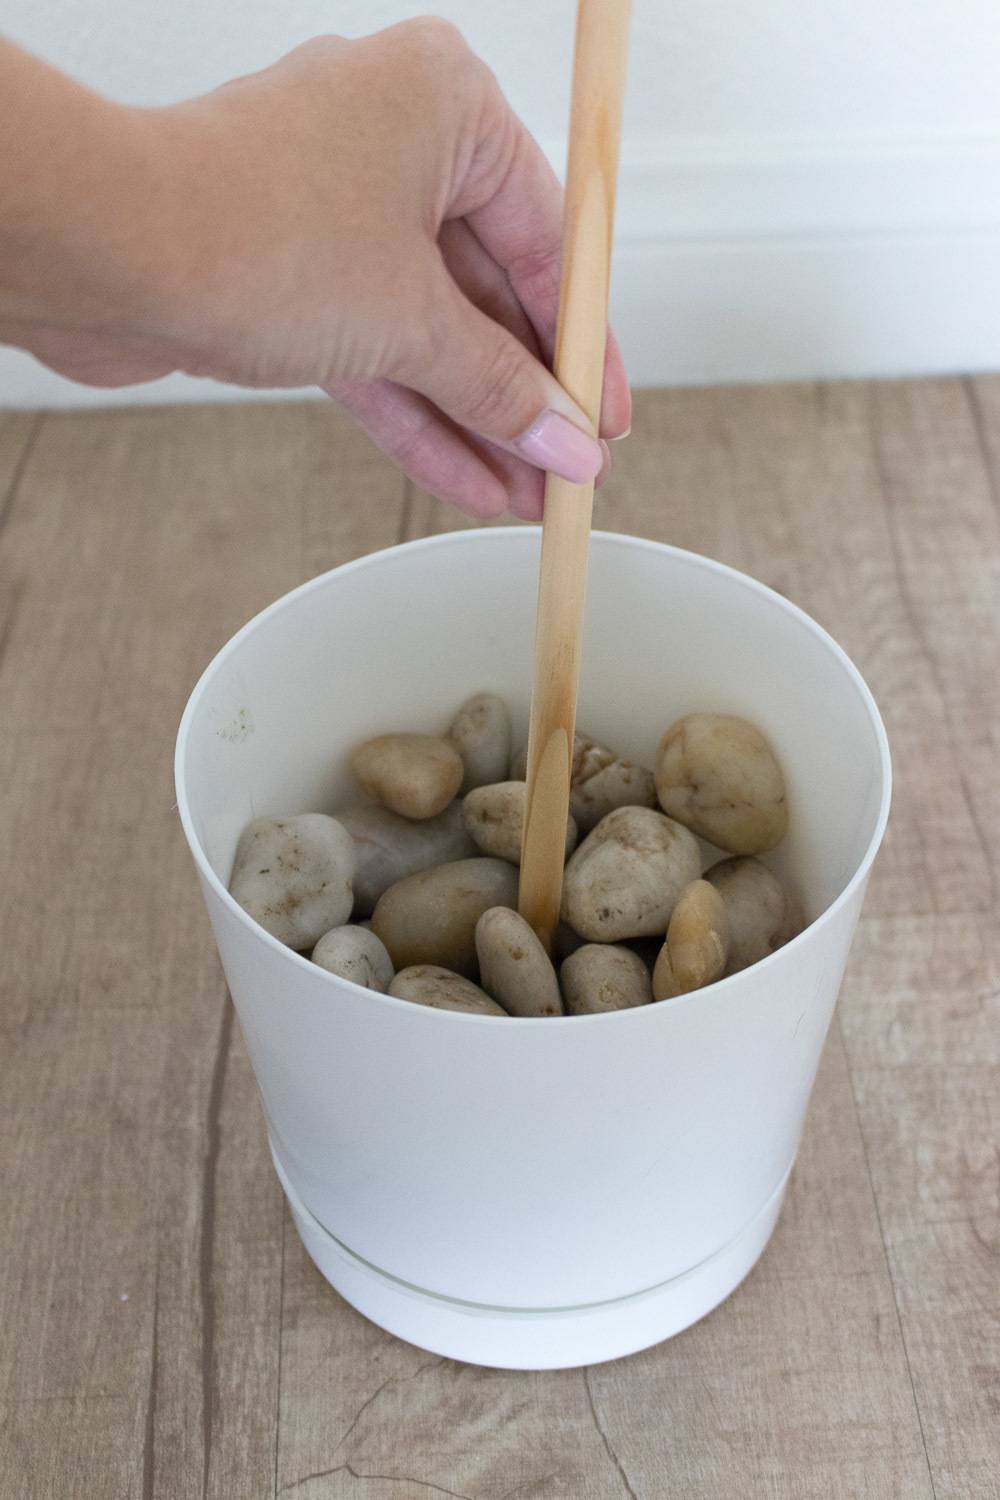 A person putting a stick in a cup of rocks.